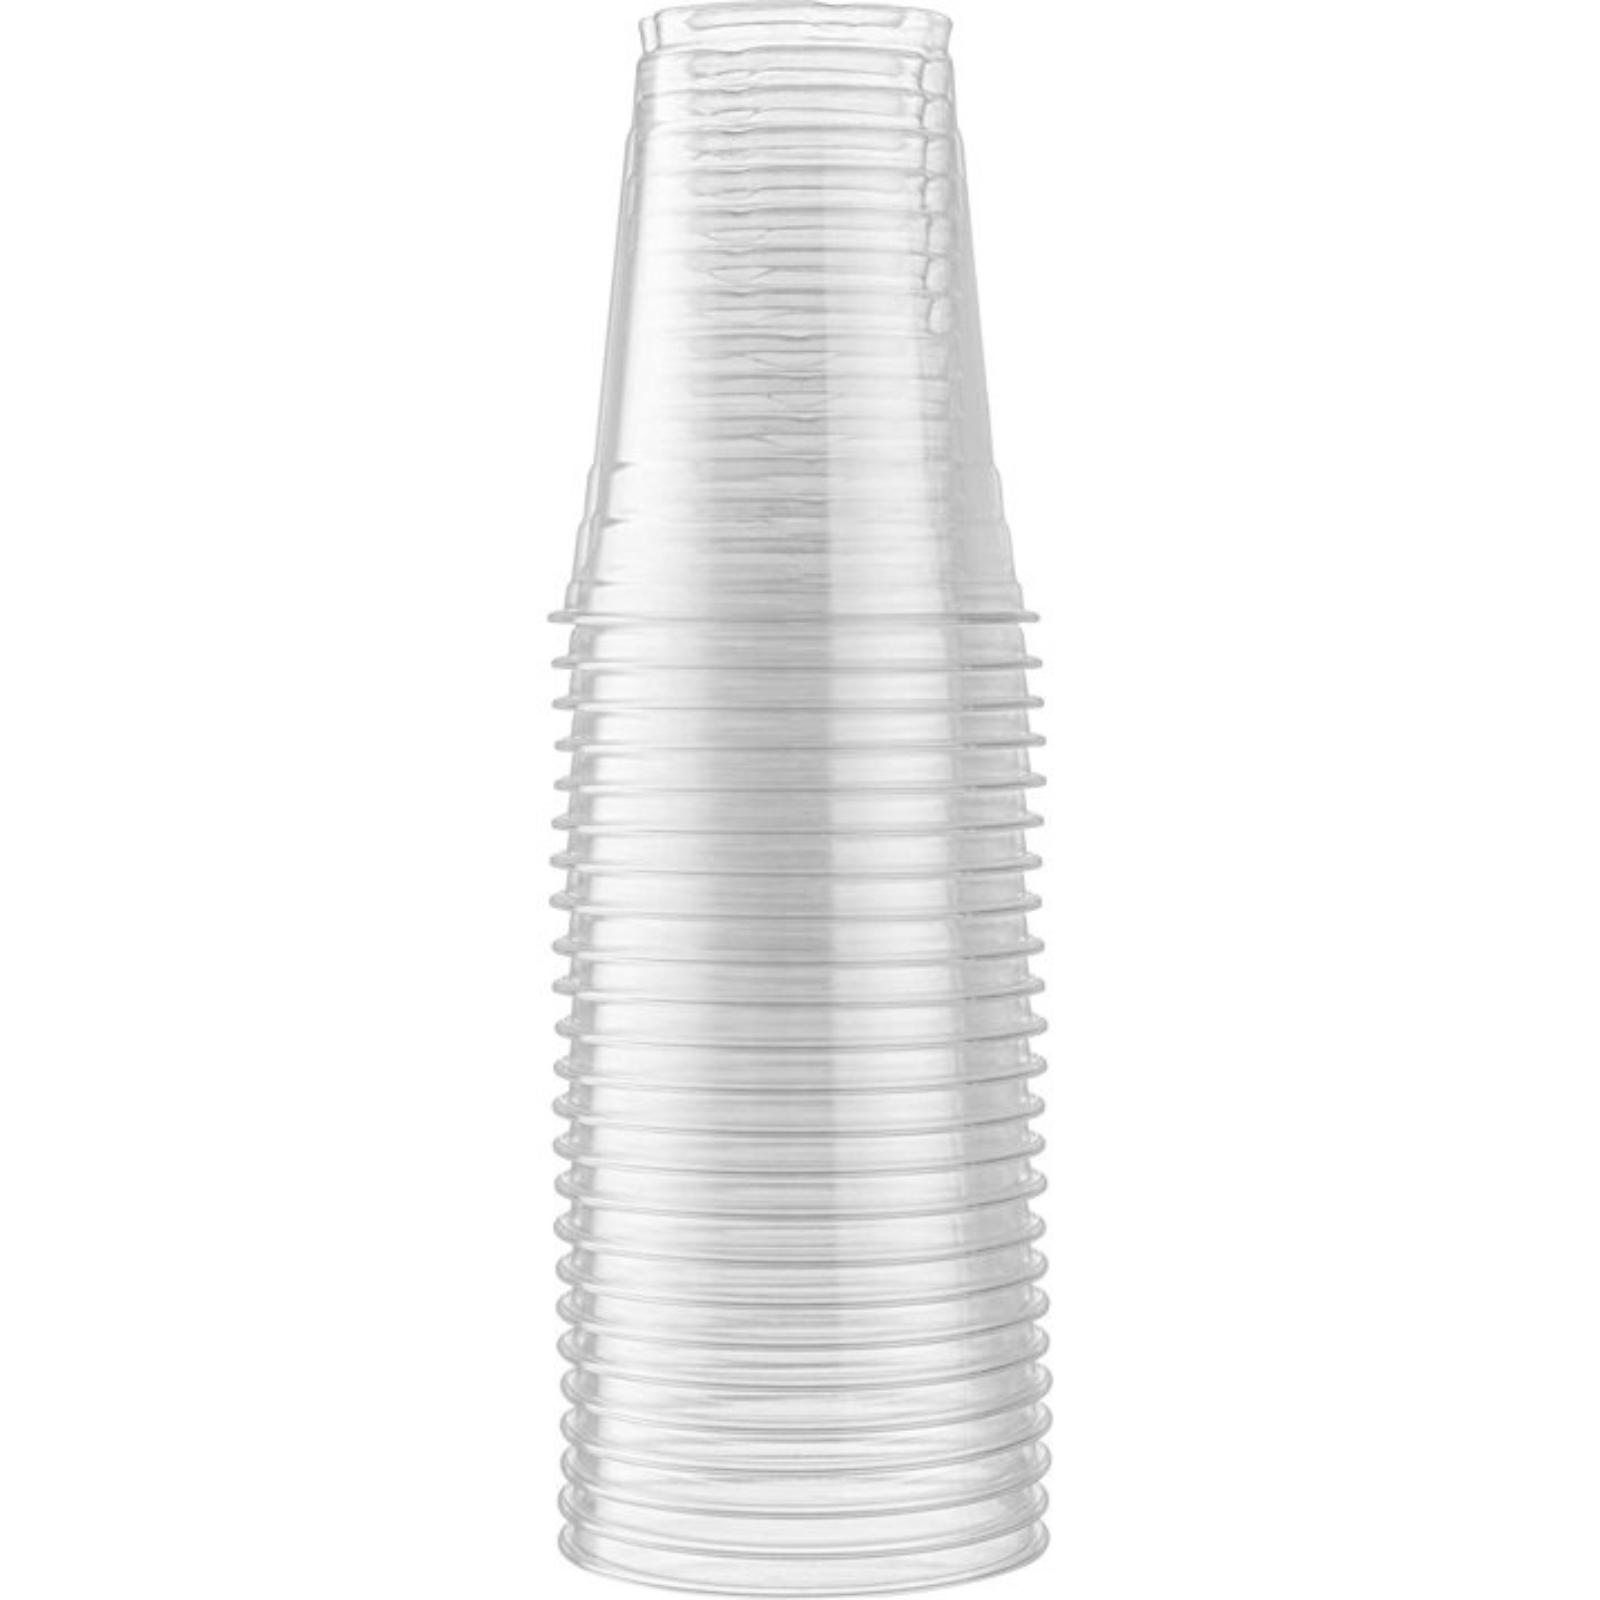 16oz Plastic Clear PET Cups With Flat Lid & Straw, for All Kinds of Beverages Smoothie Cups VeZee Cups 100 Pack 